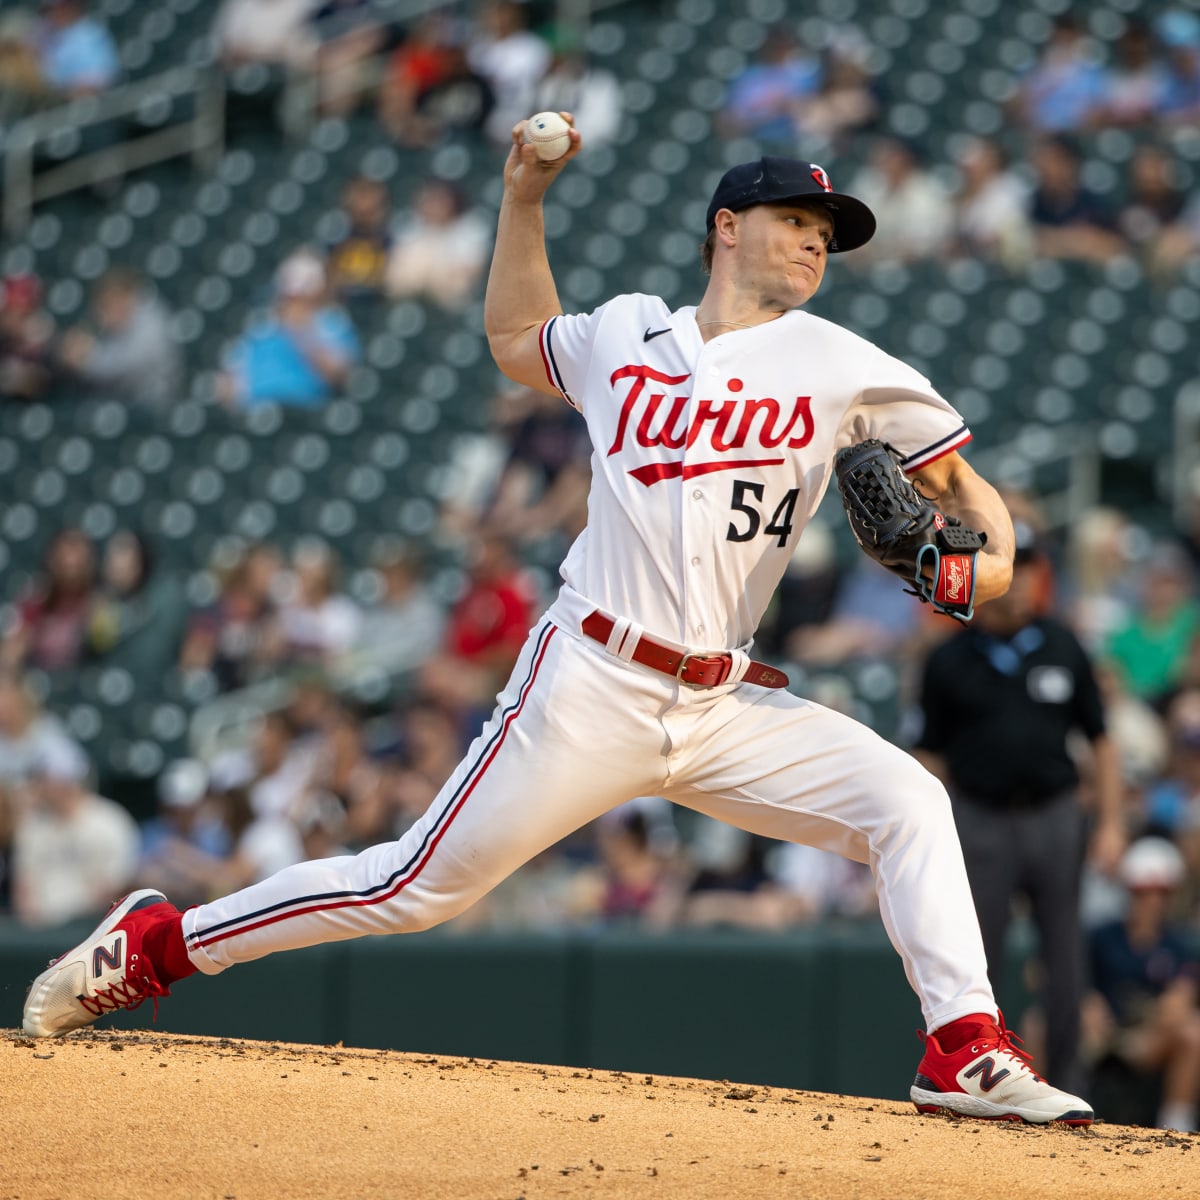 Sonny day: Gray's 7 shutout innings send Twins past Tigers